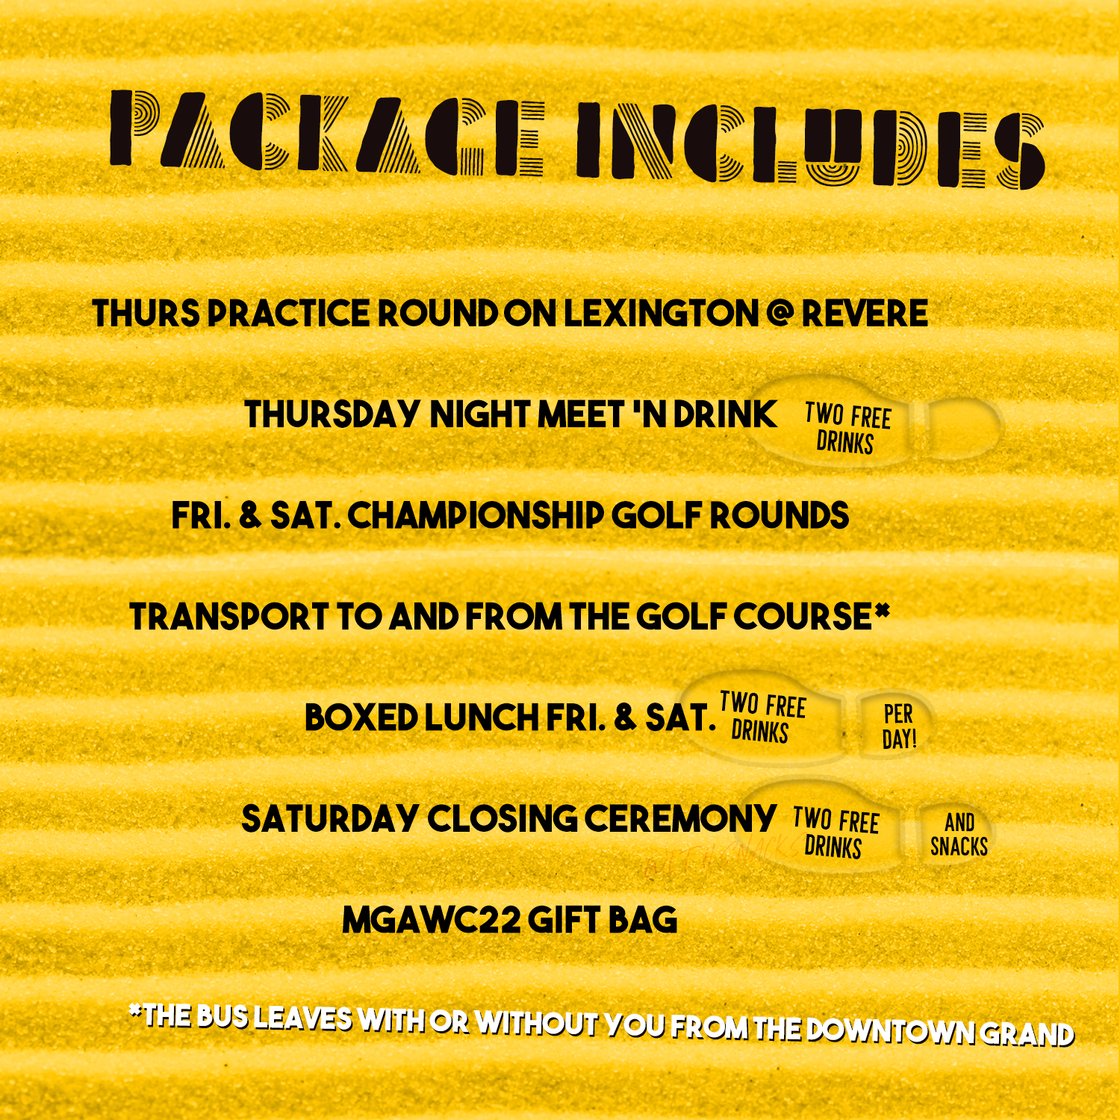 Image of 4 Nights 3 Rounds // Wed. November 9th Check-In